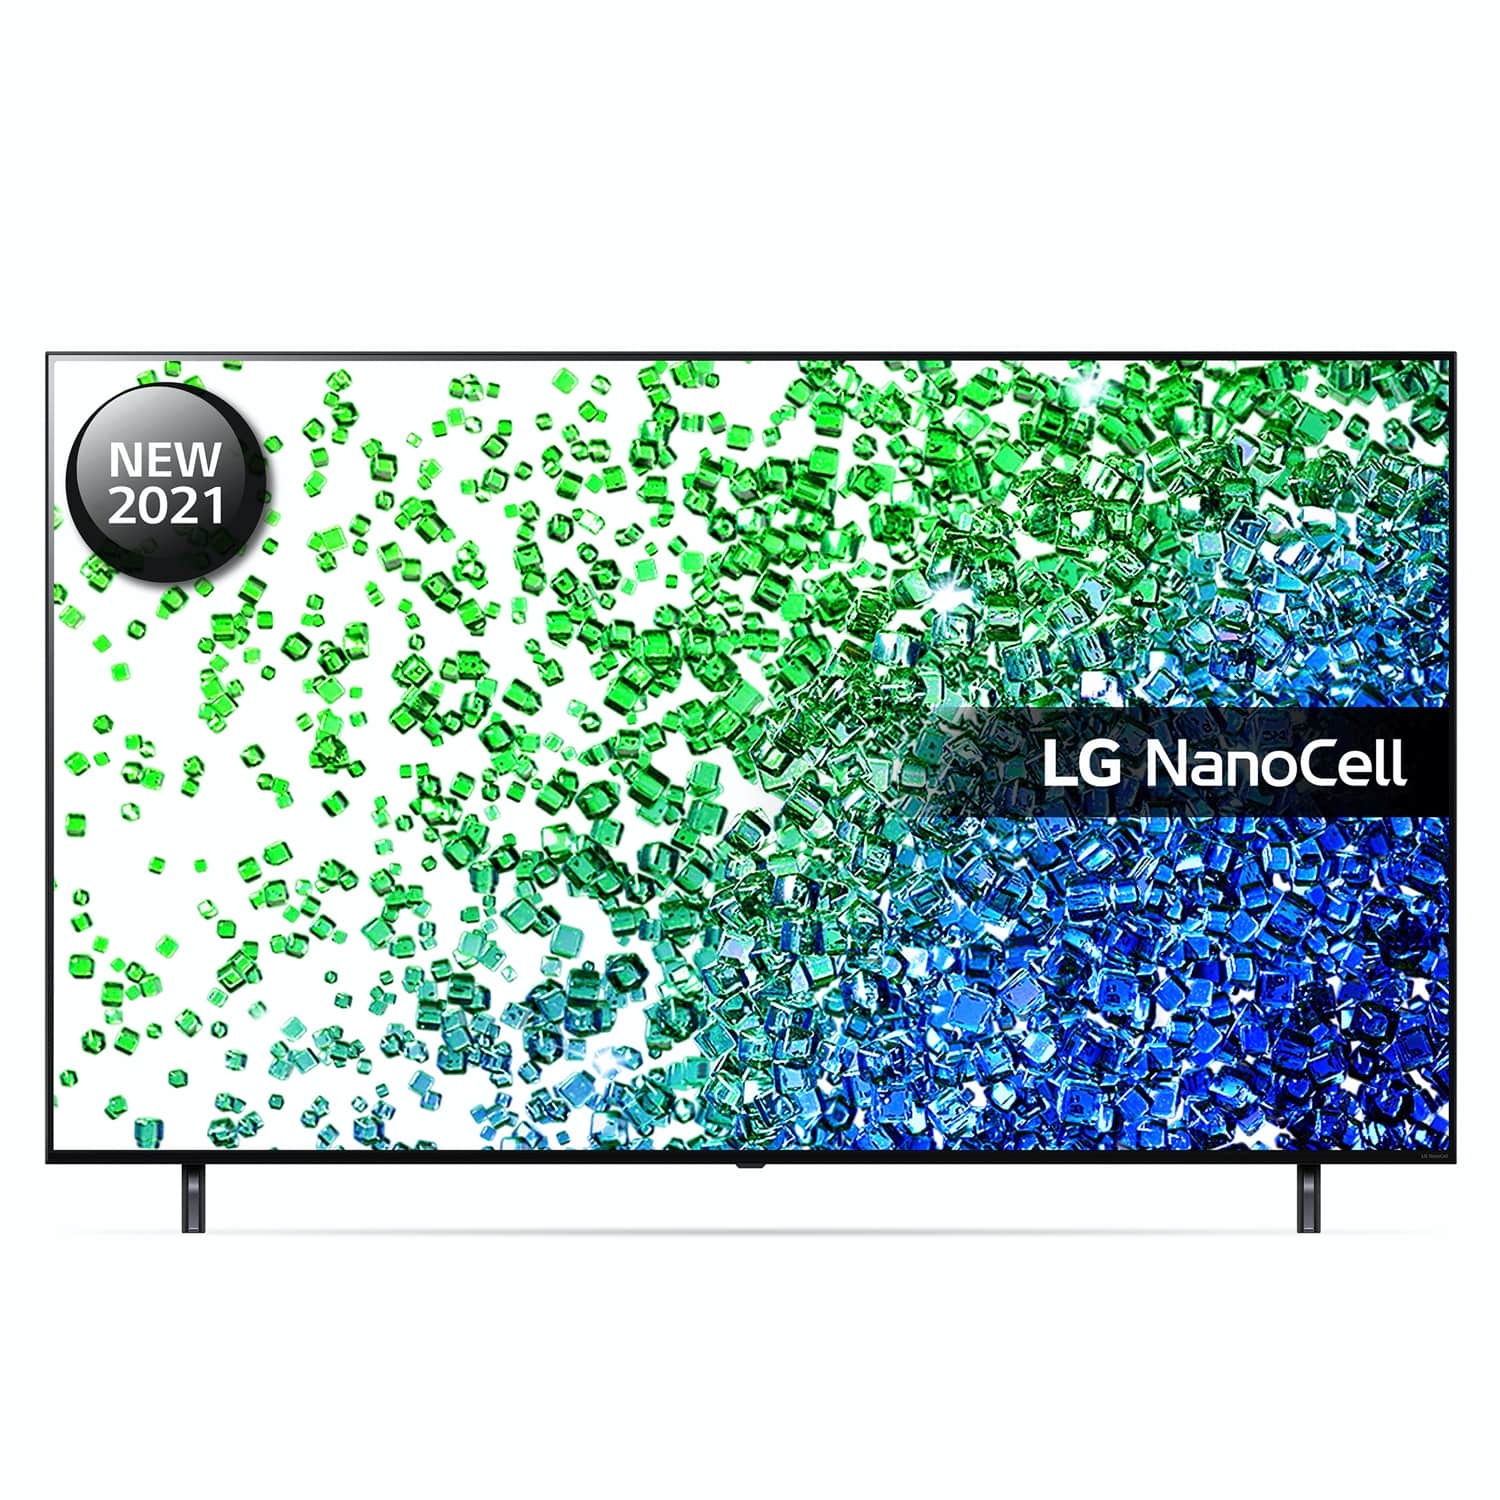 LG 75NANO806PA 75" 4K Ultra HD HDR NanoCell LED Smart TV with Freeview Play Freesat HD & Voice Assistants - 0